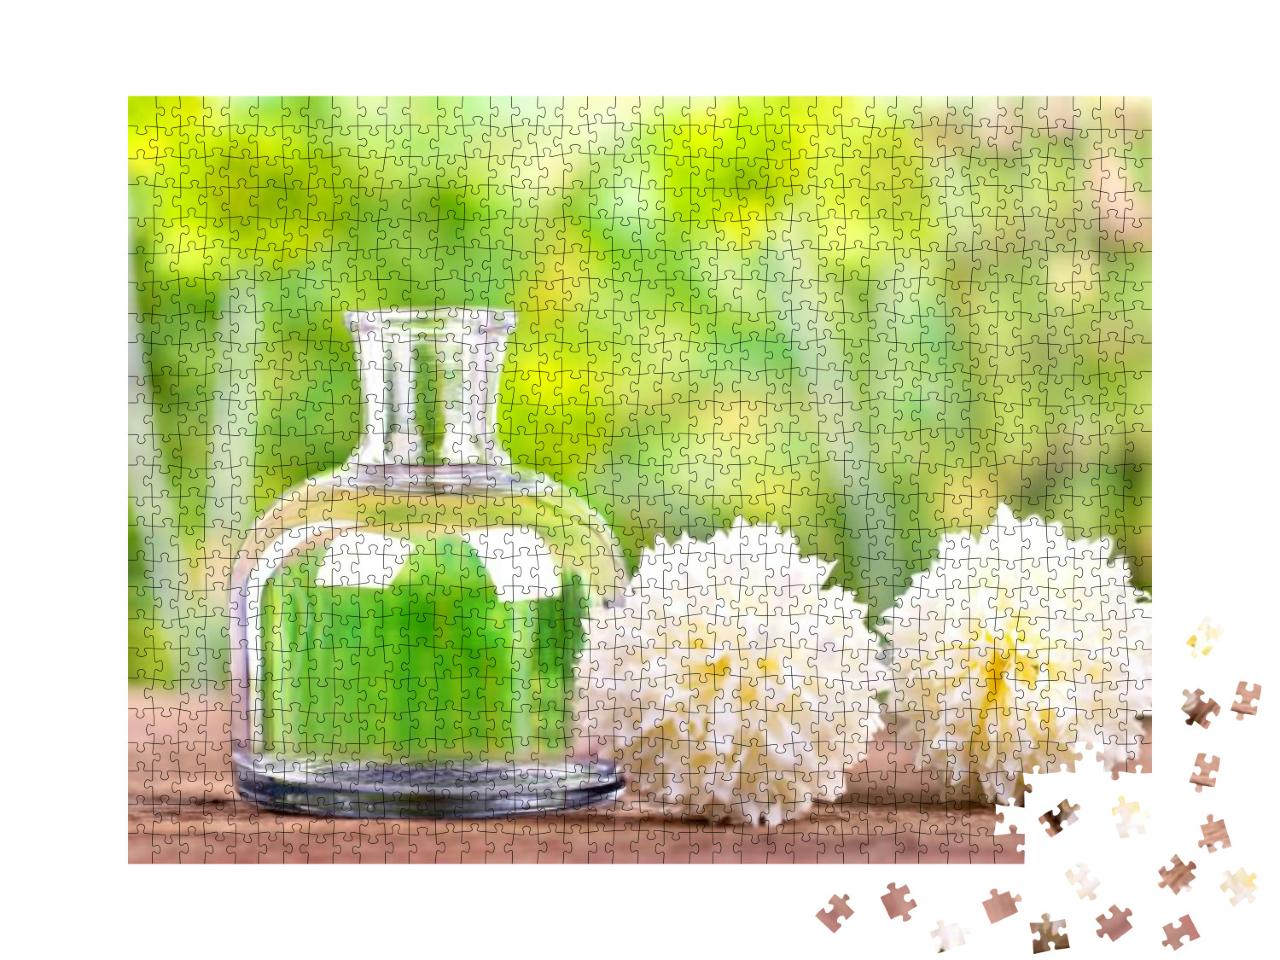 Refreshing Natural Beauty Culture, a Bottle of Herbal Ess... Jigsaw Puzzle with 1000 pieces